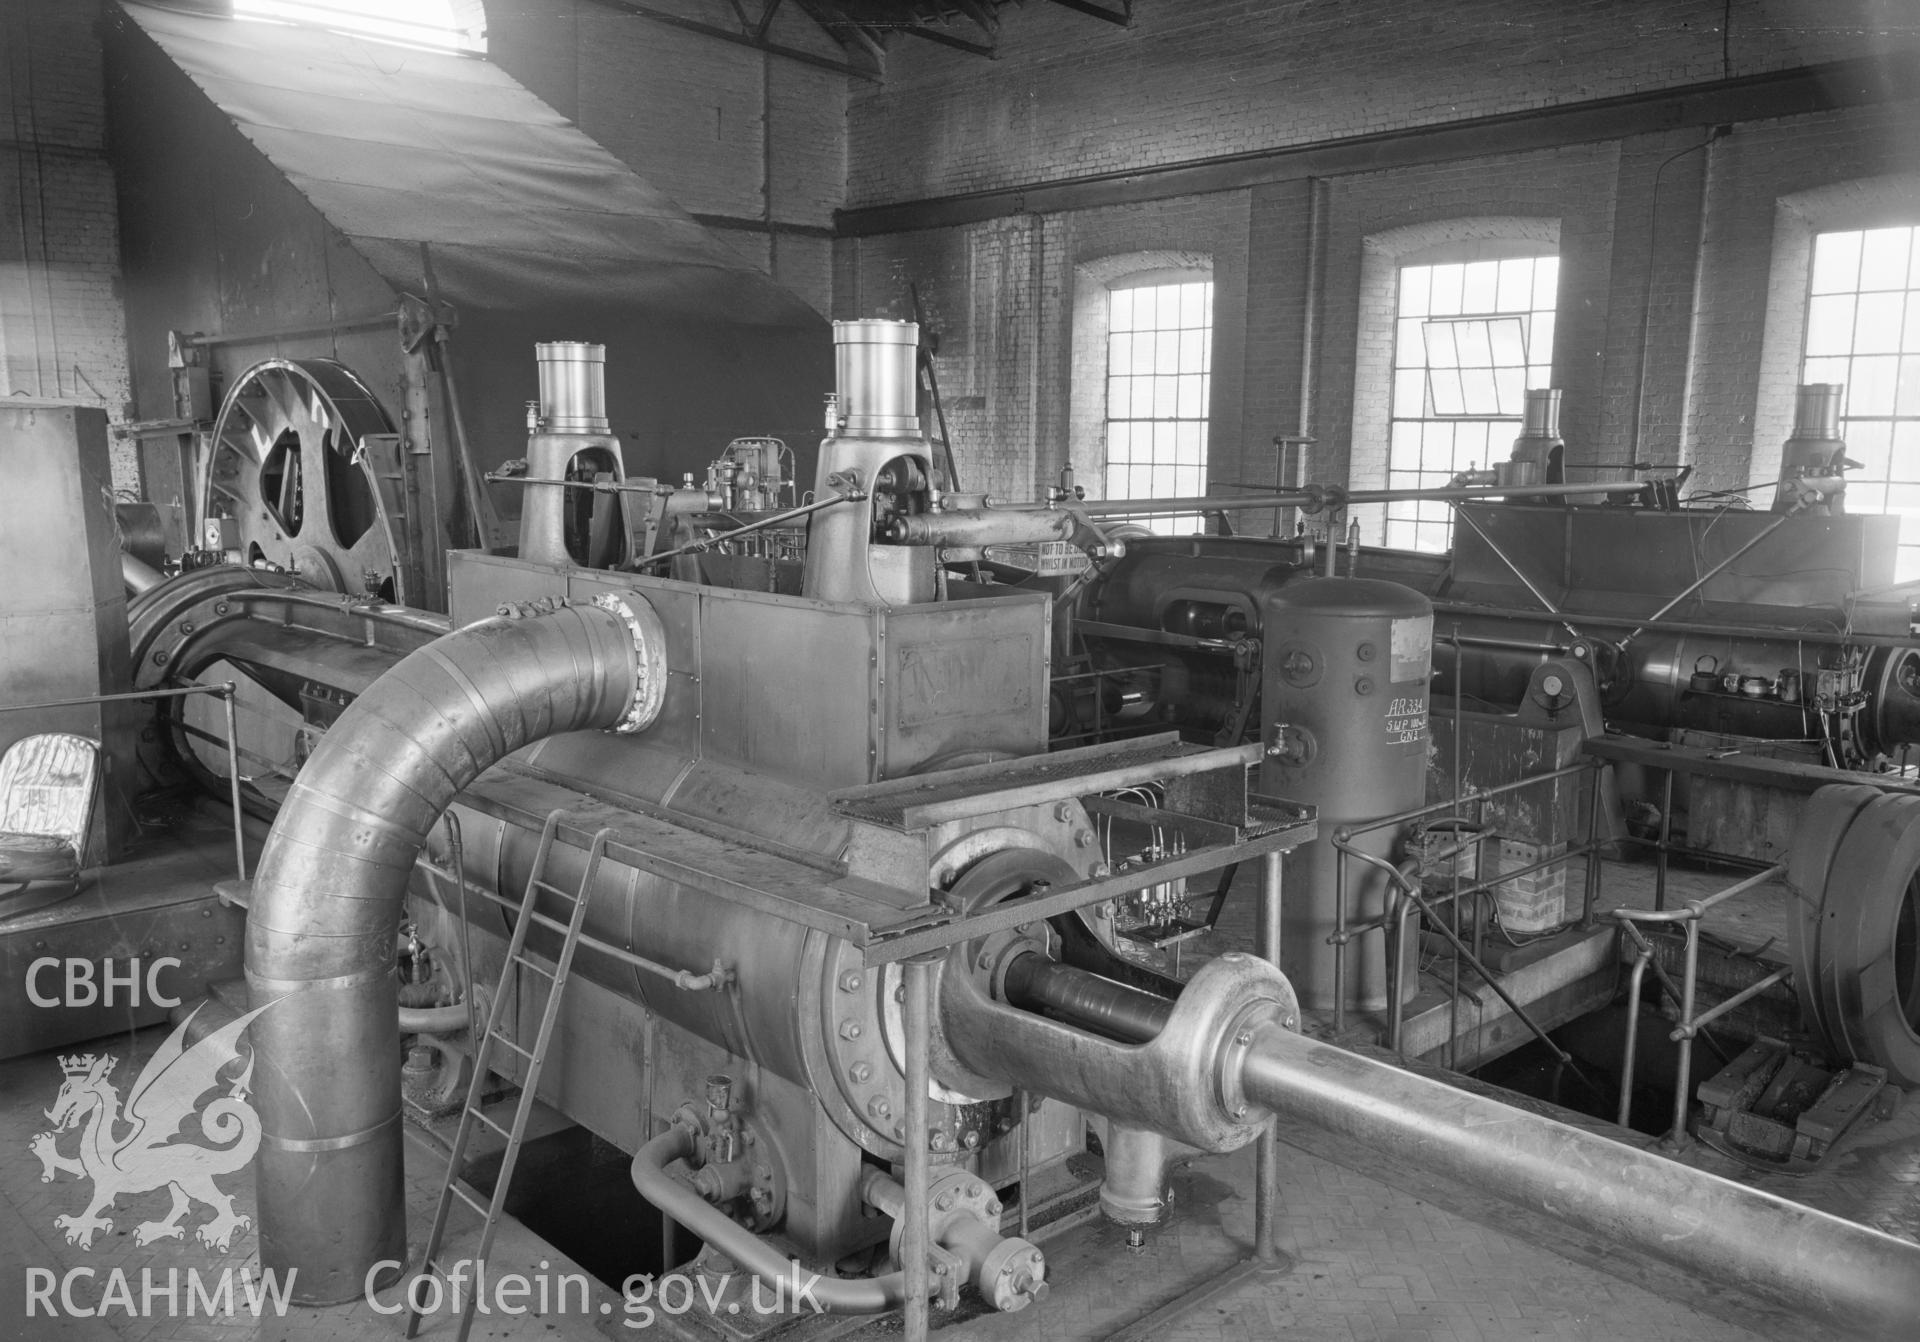 Digital copy of an acetate negative showing steam winding engine at Cefncoed Colliery, made by Markham Ltd. 1911, taken by John Cornwell.